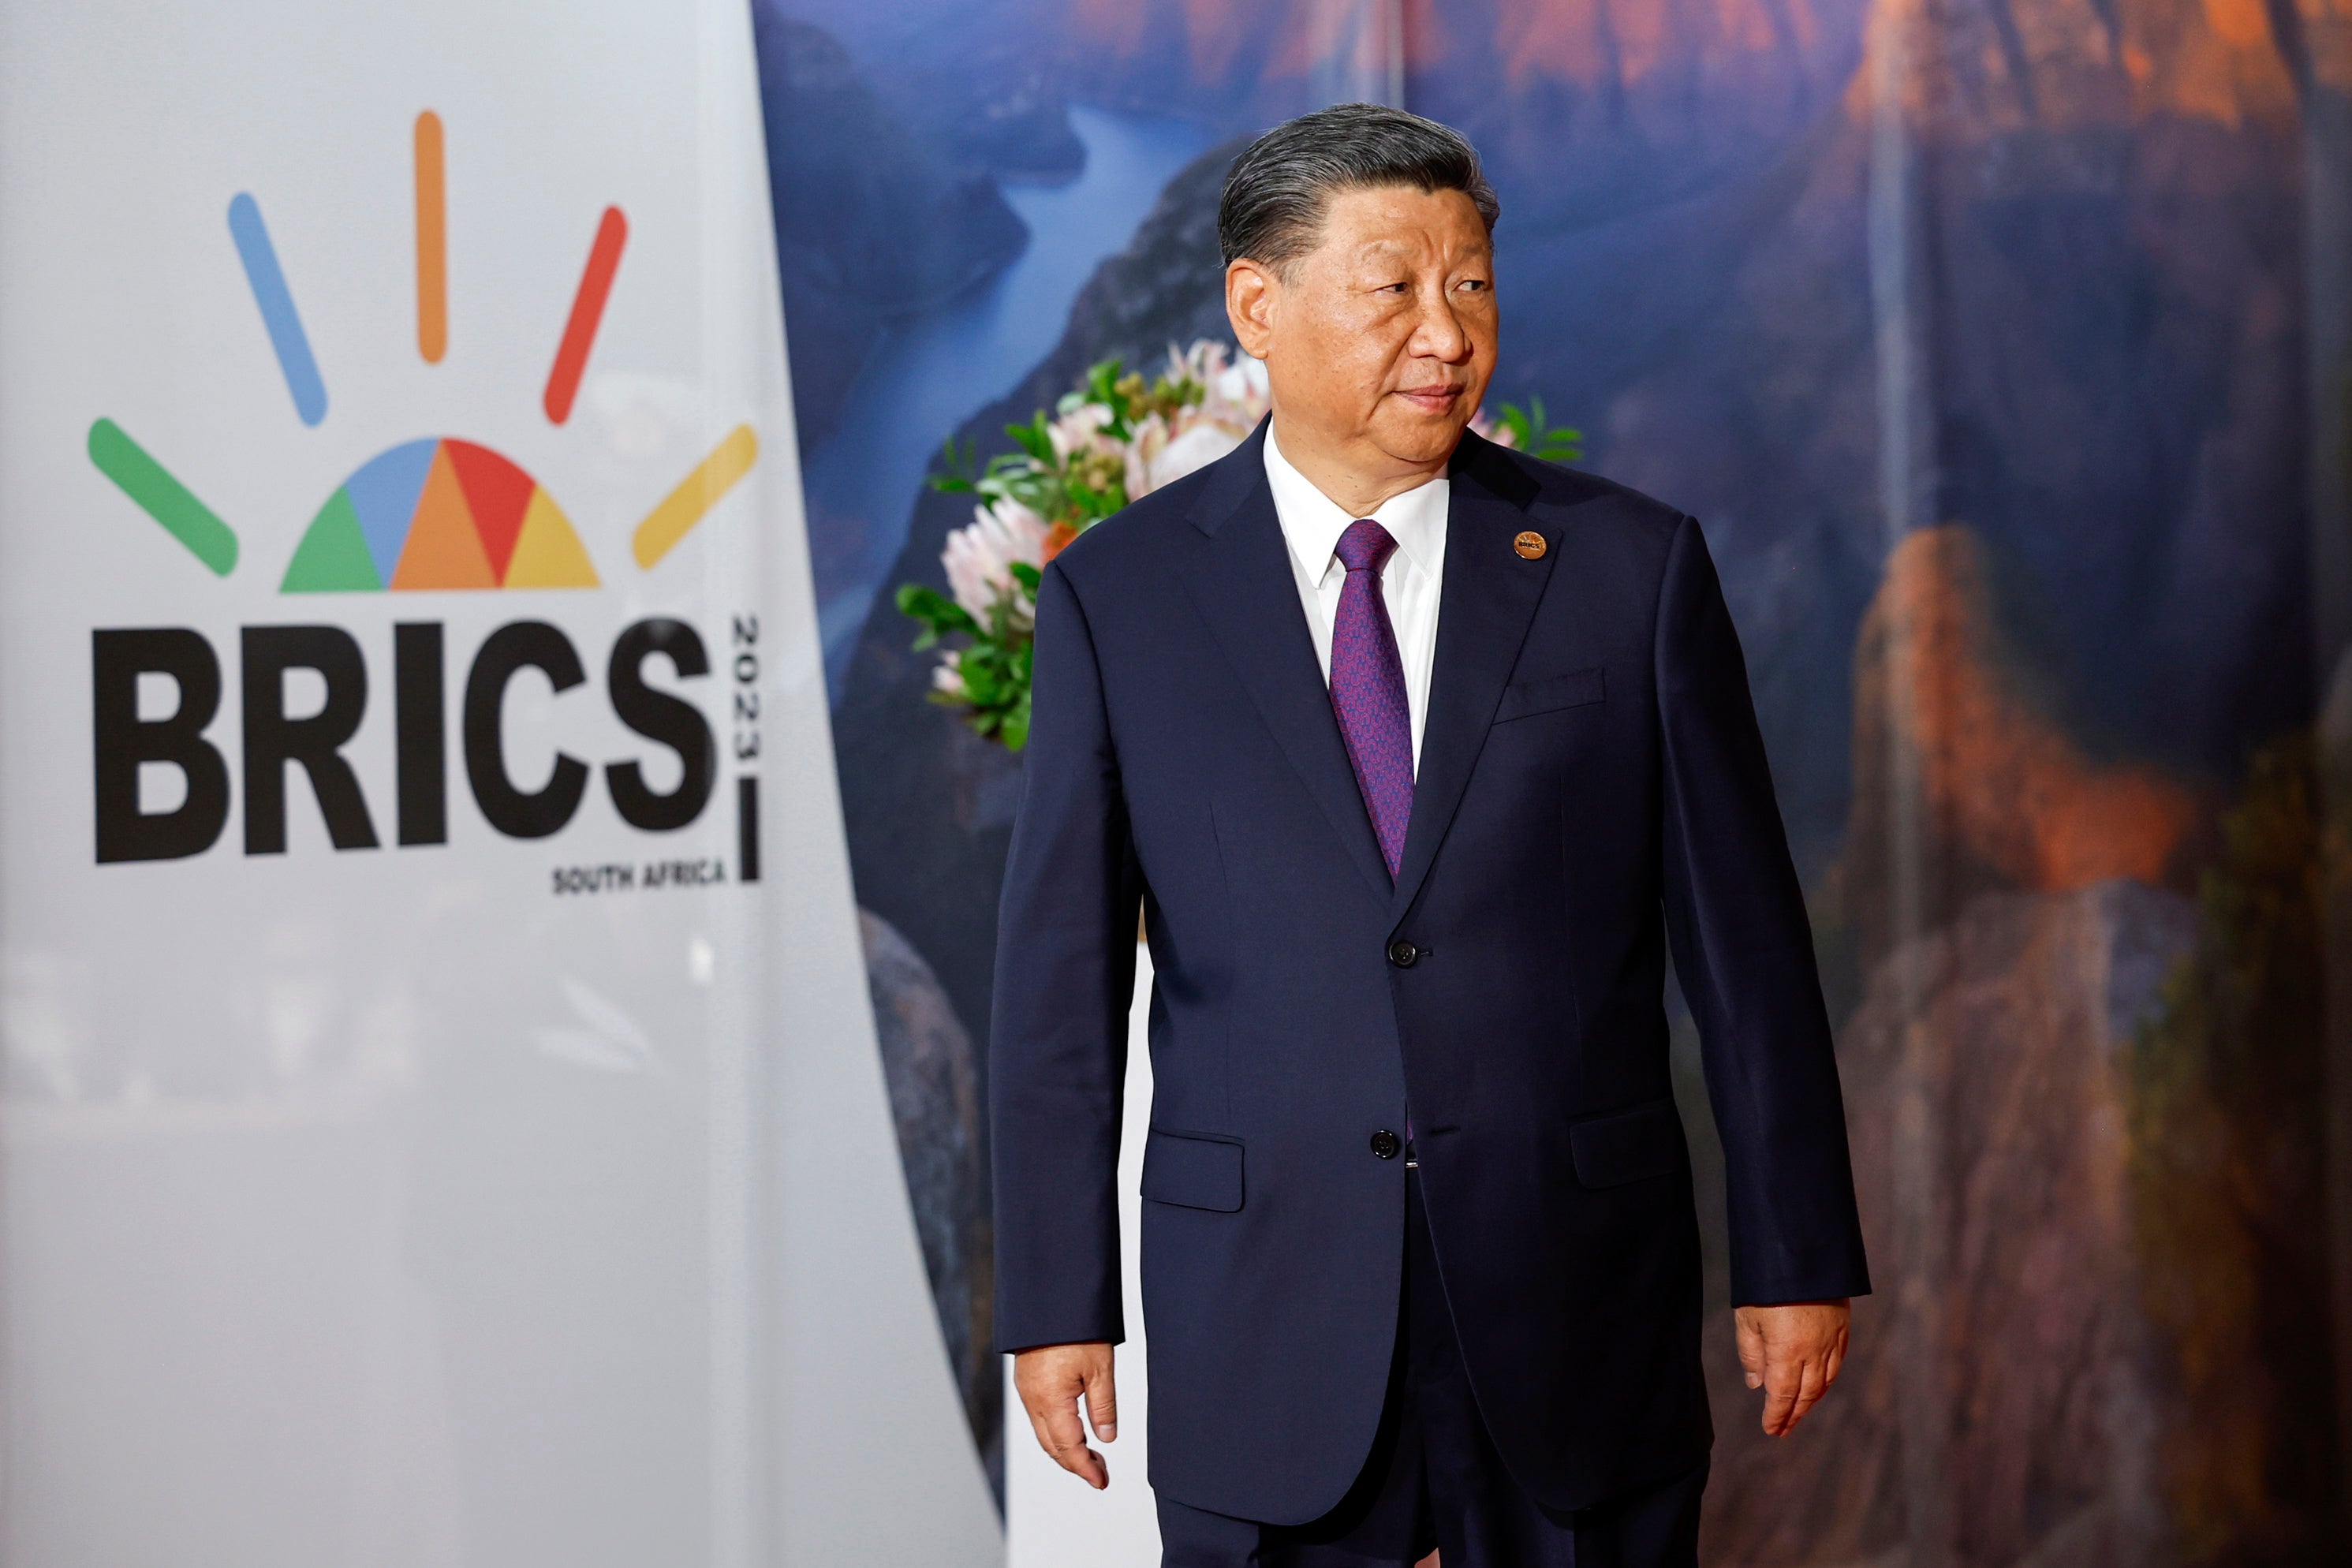 As Xi Jinping arrives at the Brics summit in Johannesburg, China’s economy could also be heading south